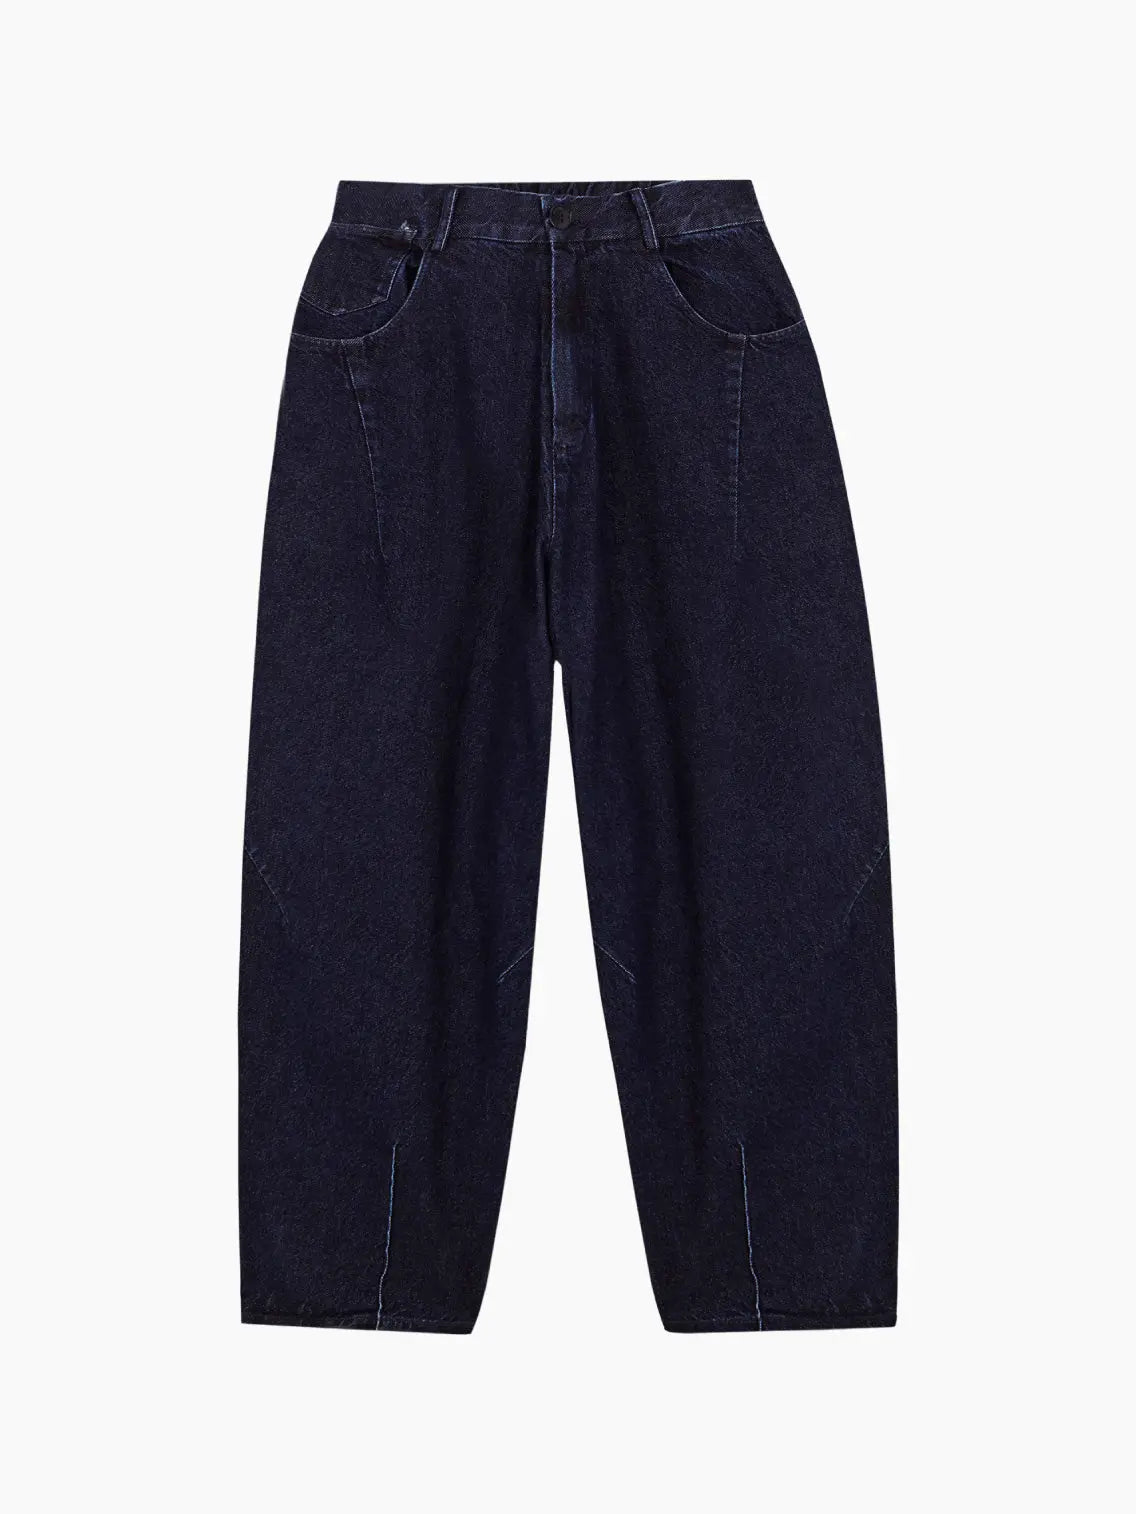 A pair of dark blue, high-waisted Denim Baggy Pants by Cordera with a relaxed, wide-leg fit. The pants feature side pockets, front zipper closure, and contrast stitching along the seams. Available at BassalStore in Barcelona, the fabric appears to have a slightly worn-in texture.